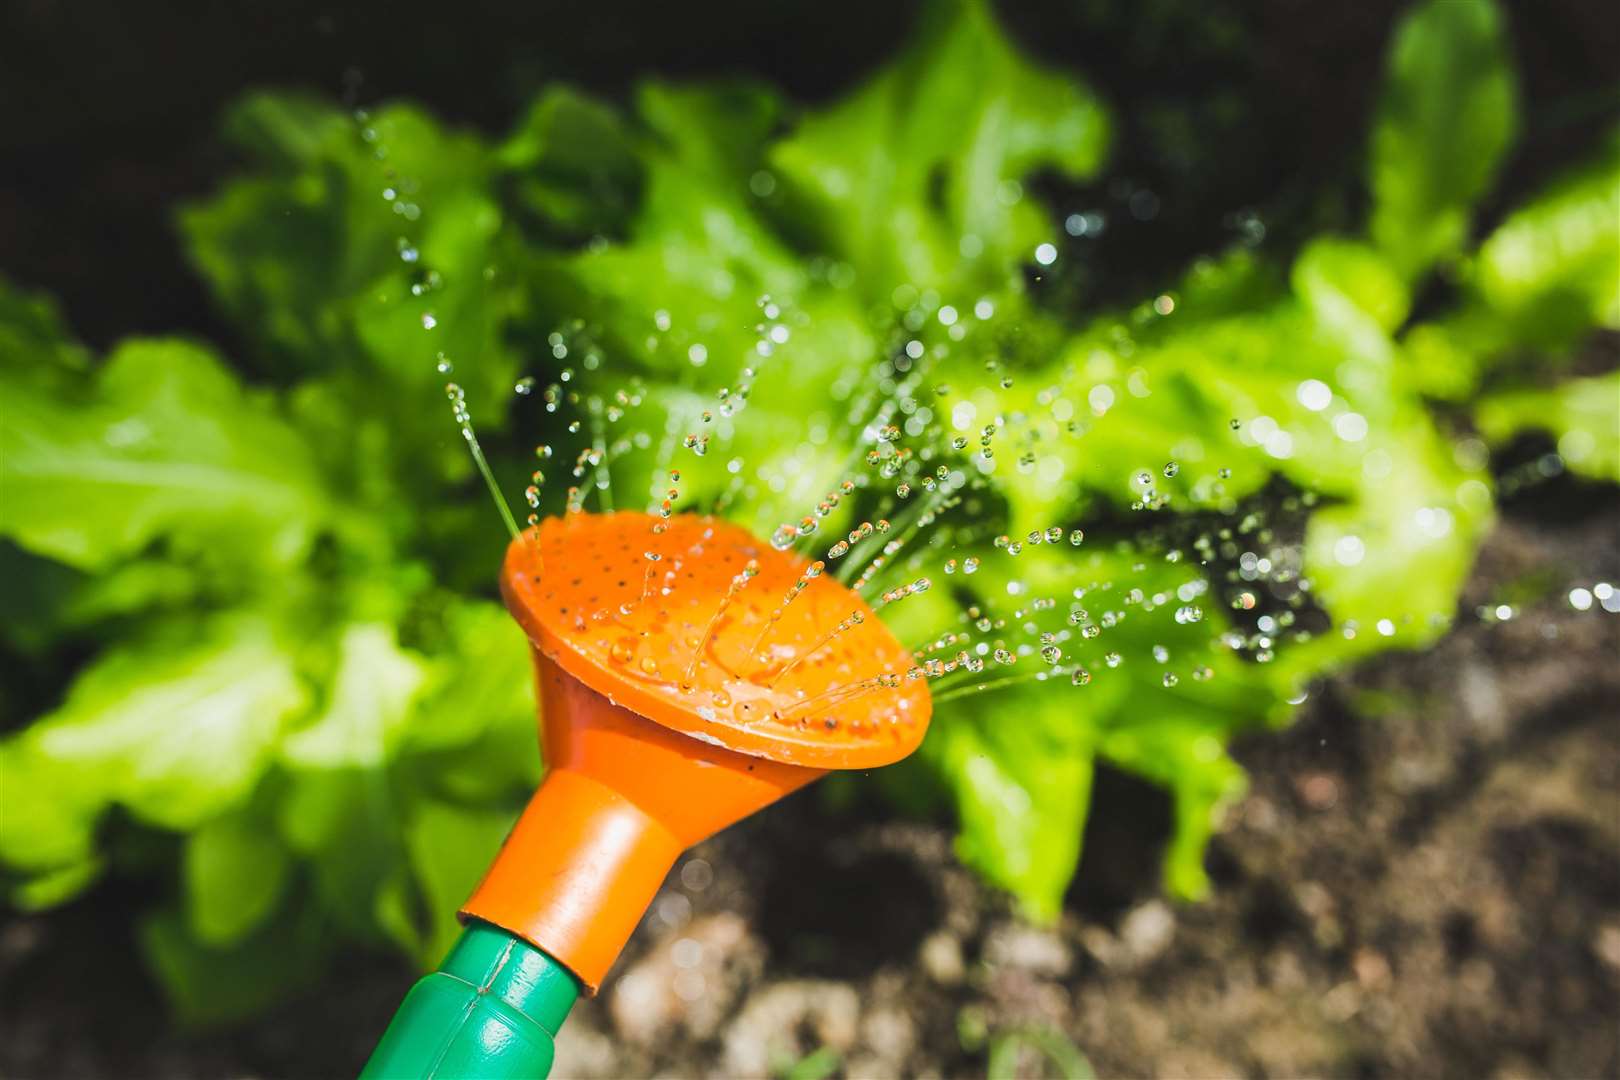 Using a watering can and water butt rather than a sprinkler can help conserve water